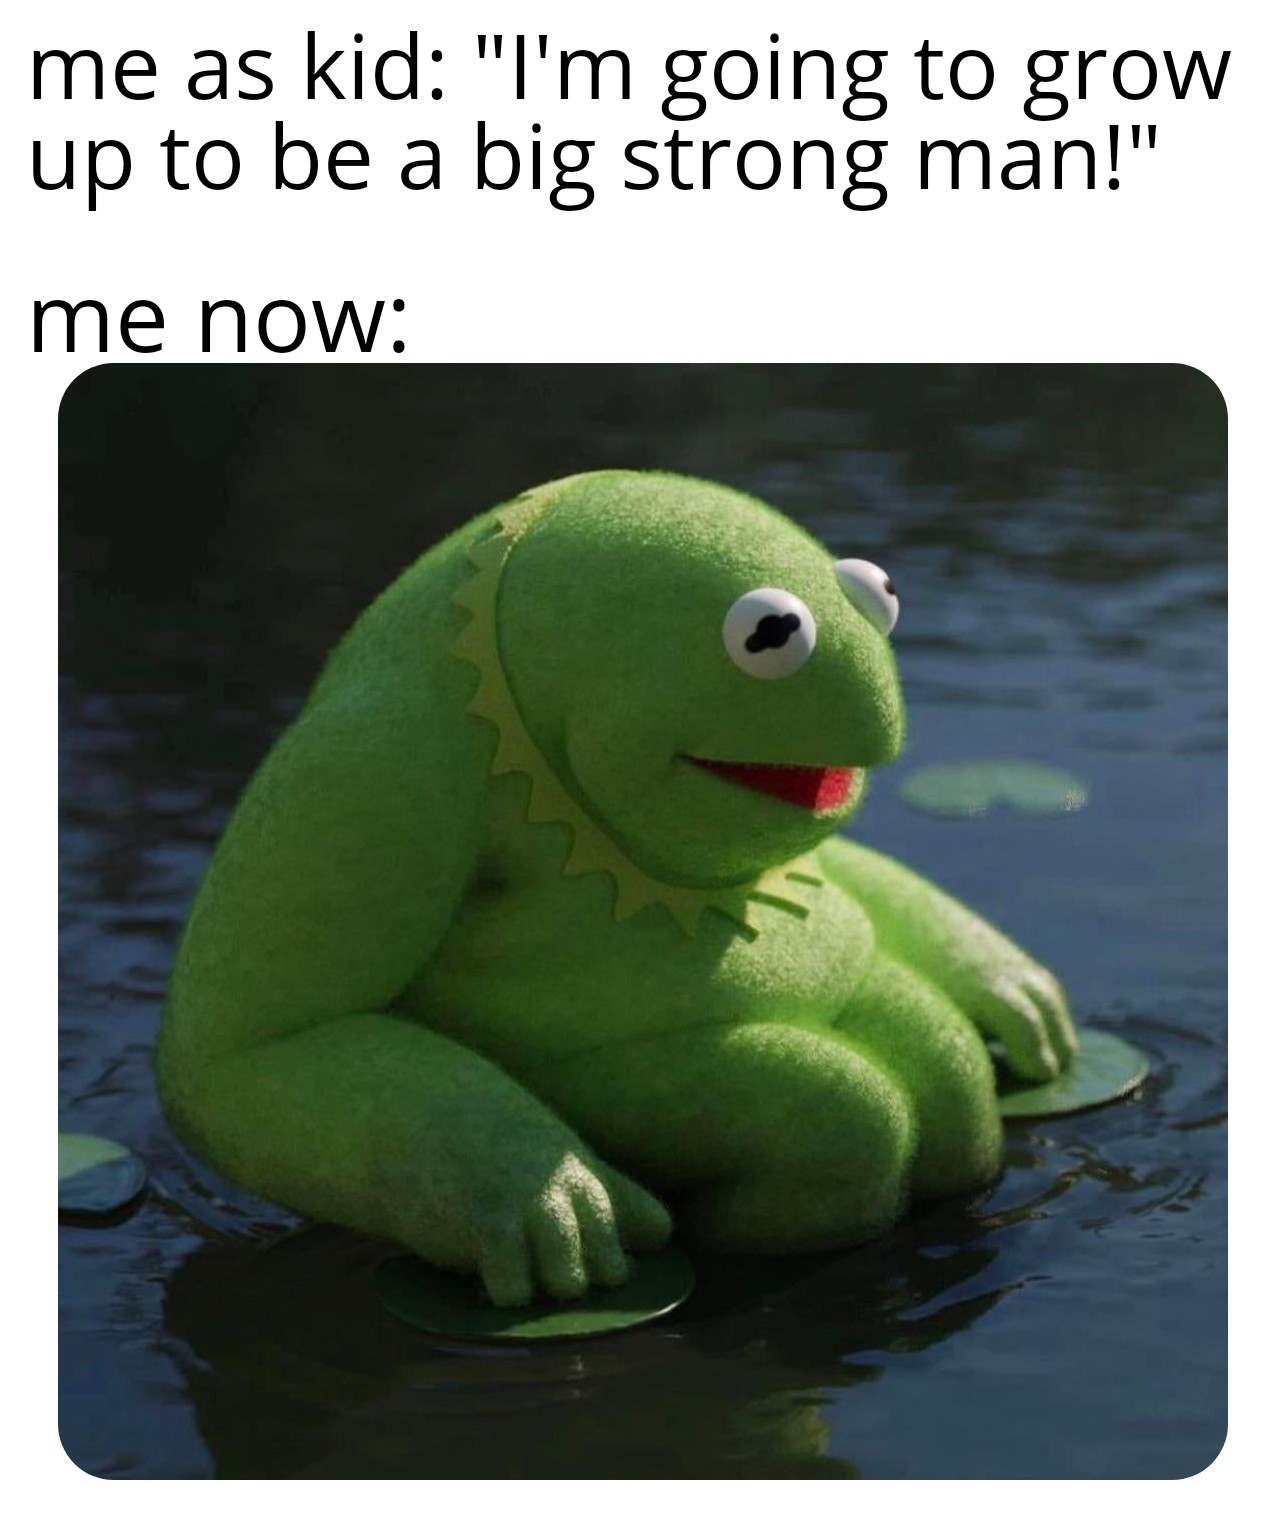 kermit meme 2021 - me as kid "I'm going to grow up to be a big strong man!" me now